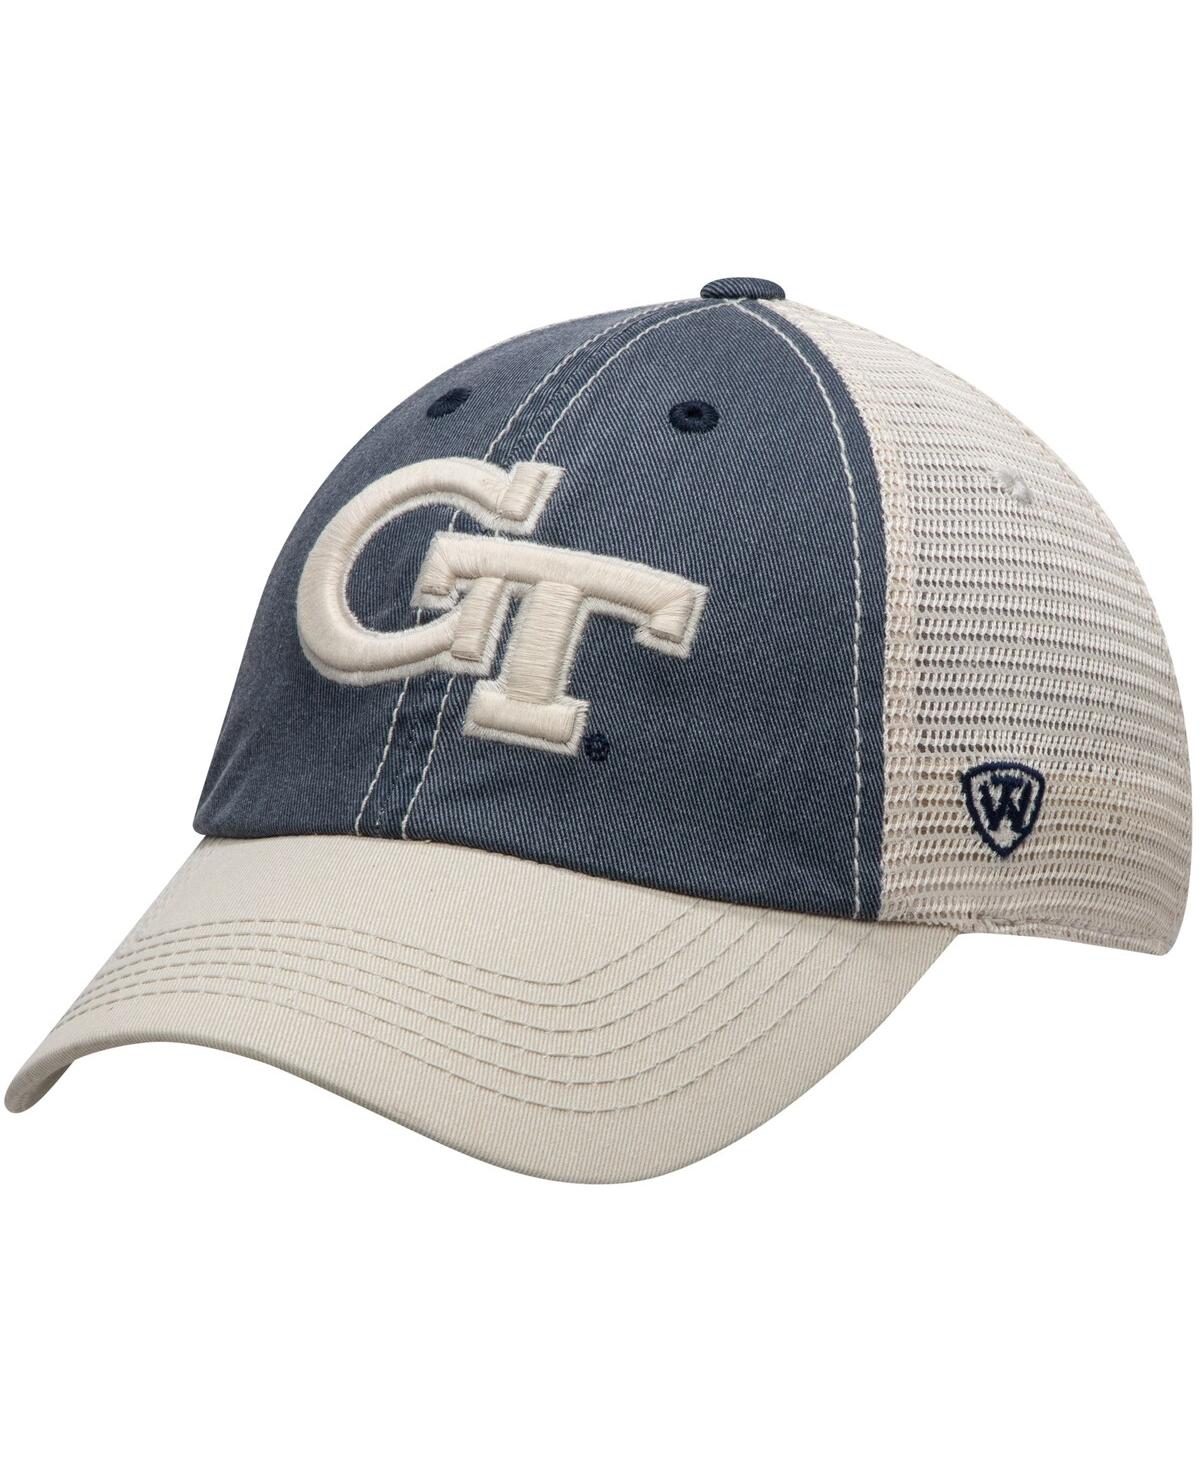 Men's Gray and Gold-Tone Ga Tech Yellow Jackets Offroad Trucker Adjustable Hat - Gray, Gold-Tone